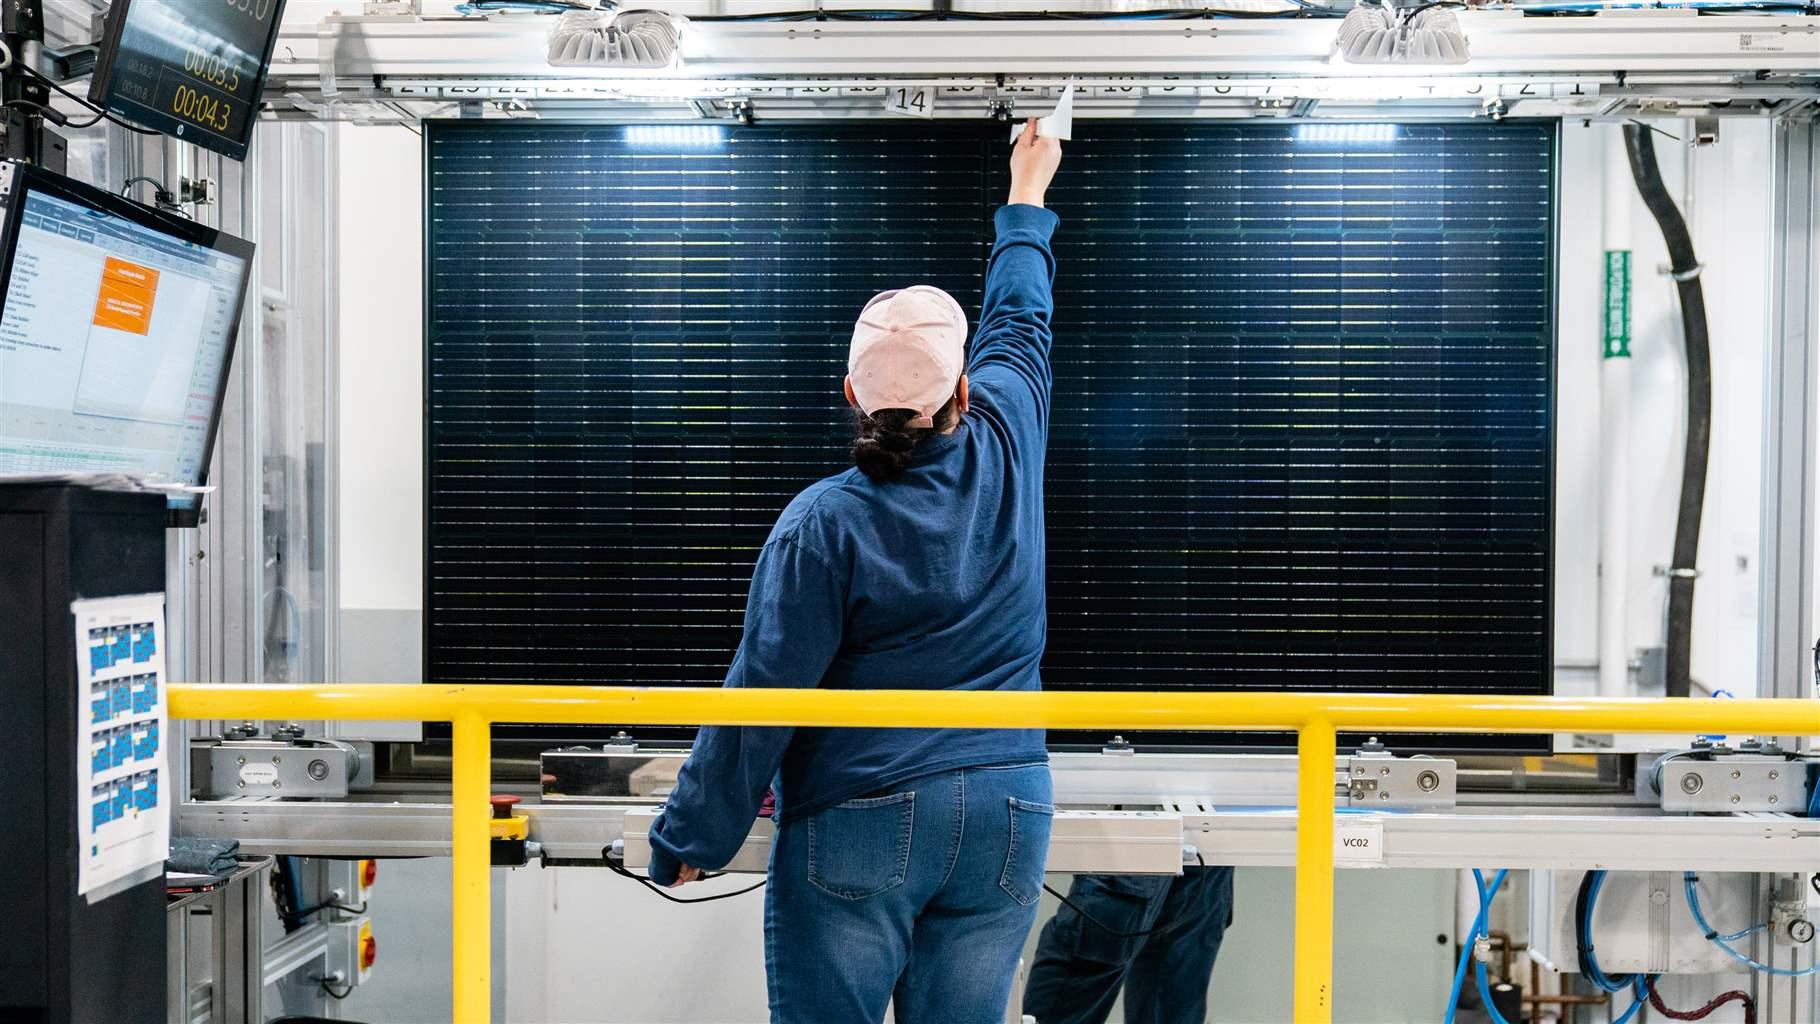 A person in a cap with their back to the camera faces a solar panel in a brightly lit industrial setting and reaches up to check the panel.